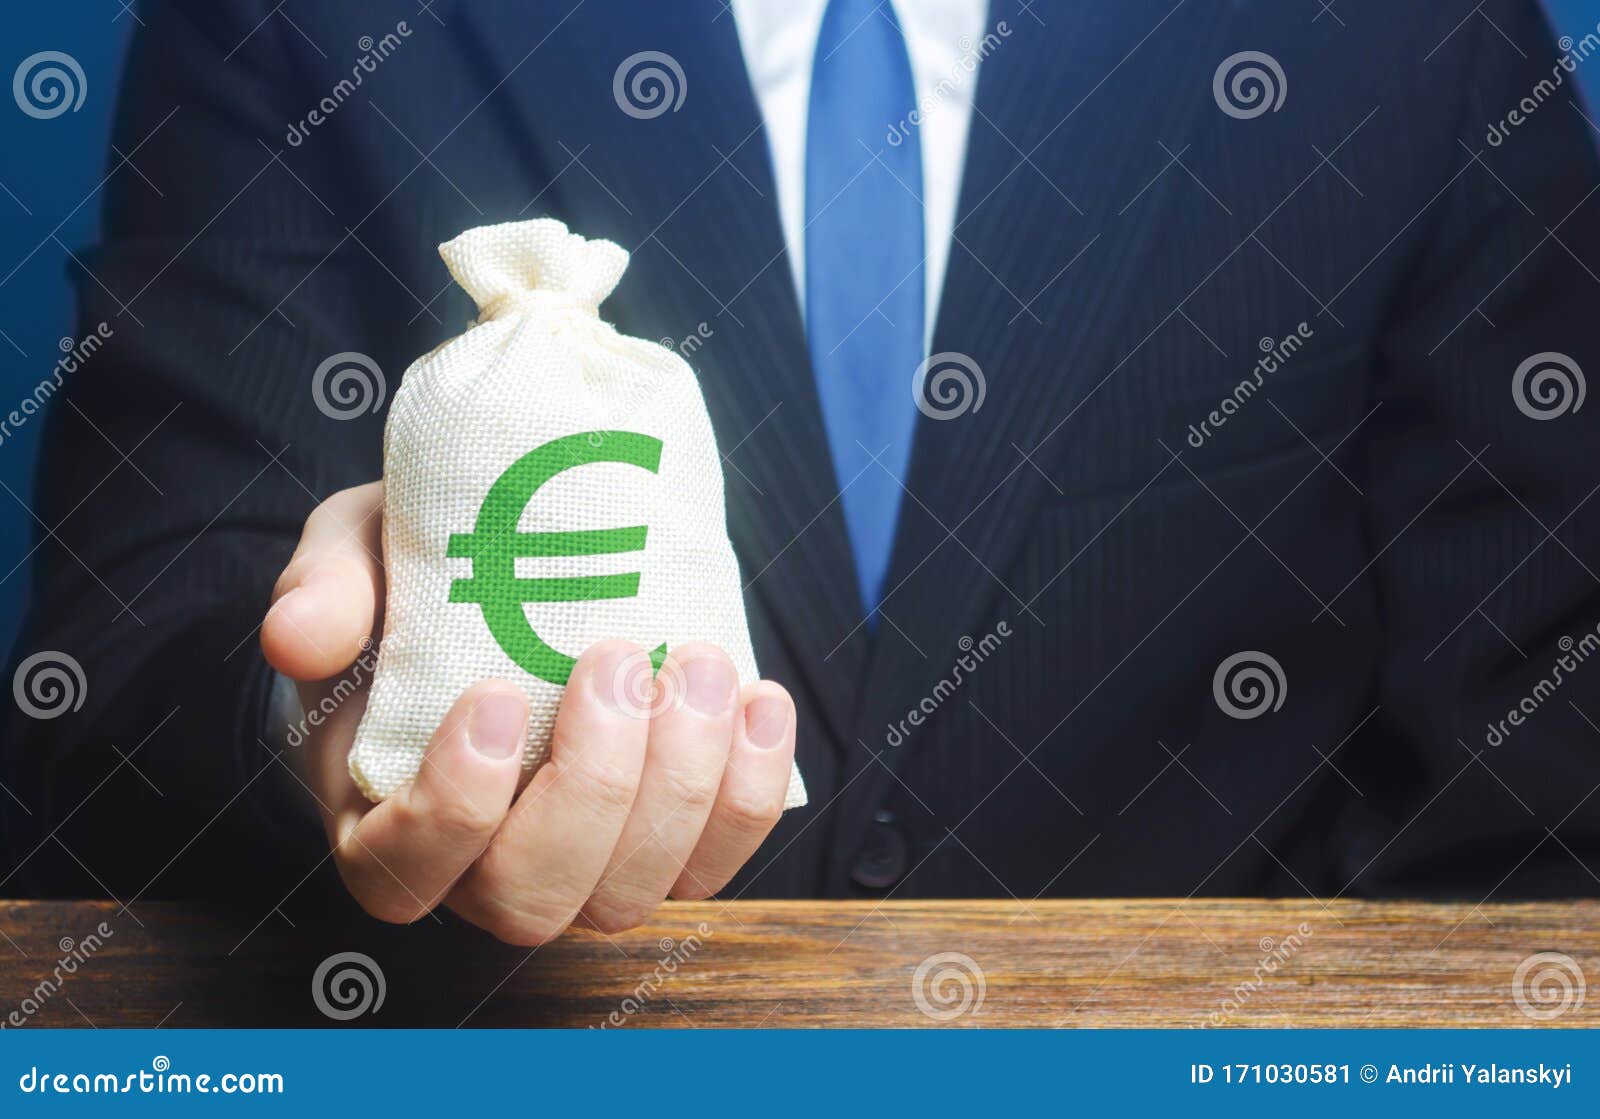 man holds euro money bag. granting financing business project or education. provision cash financial credit. profits dividends.